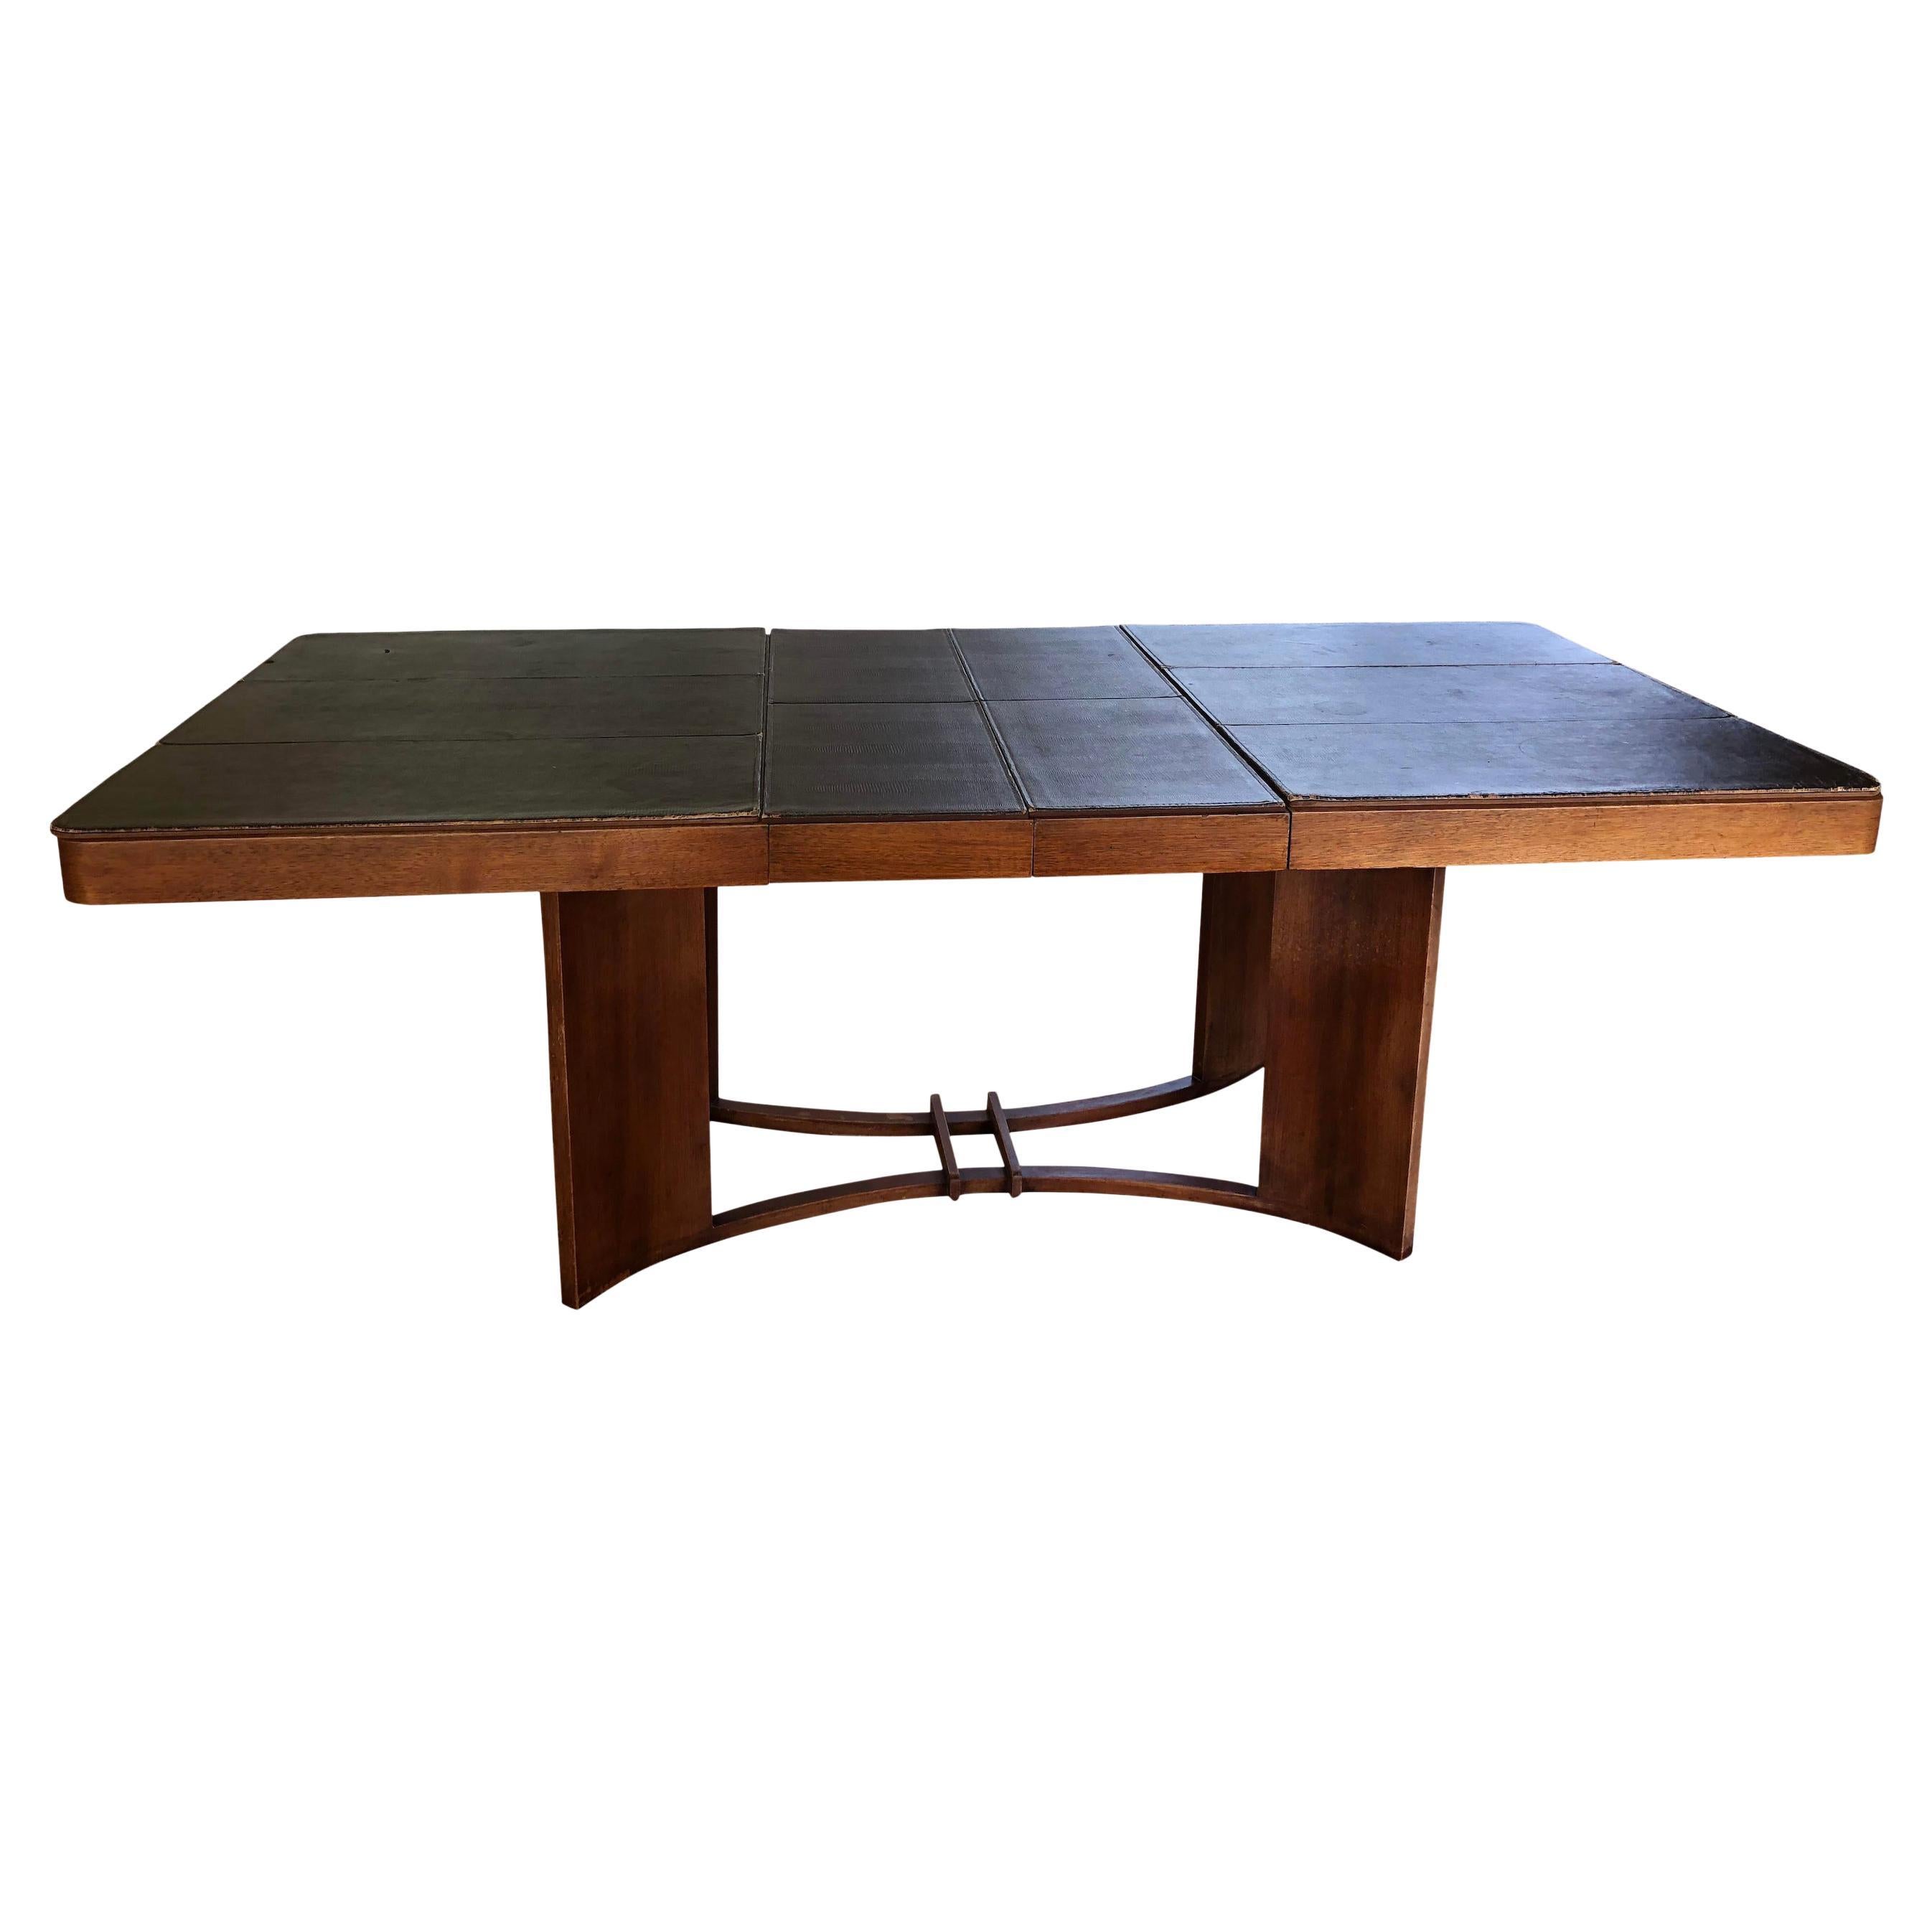 Epic Art Deco dining table by Gilbert Rohde for Herman Miller Furniture Co. (Zeeland, Michigan) circa 1930's. The table is in worn vintage condition with scuffs and blemishes appropriate to its age and use. Proof of maker’s mark on the bottom of the